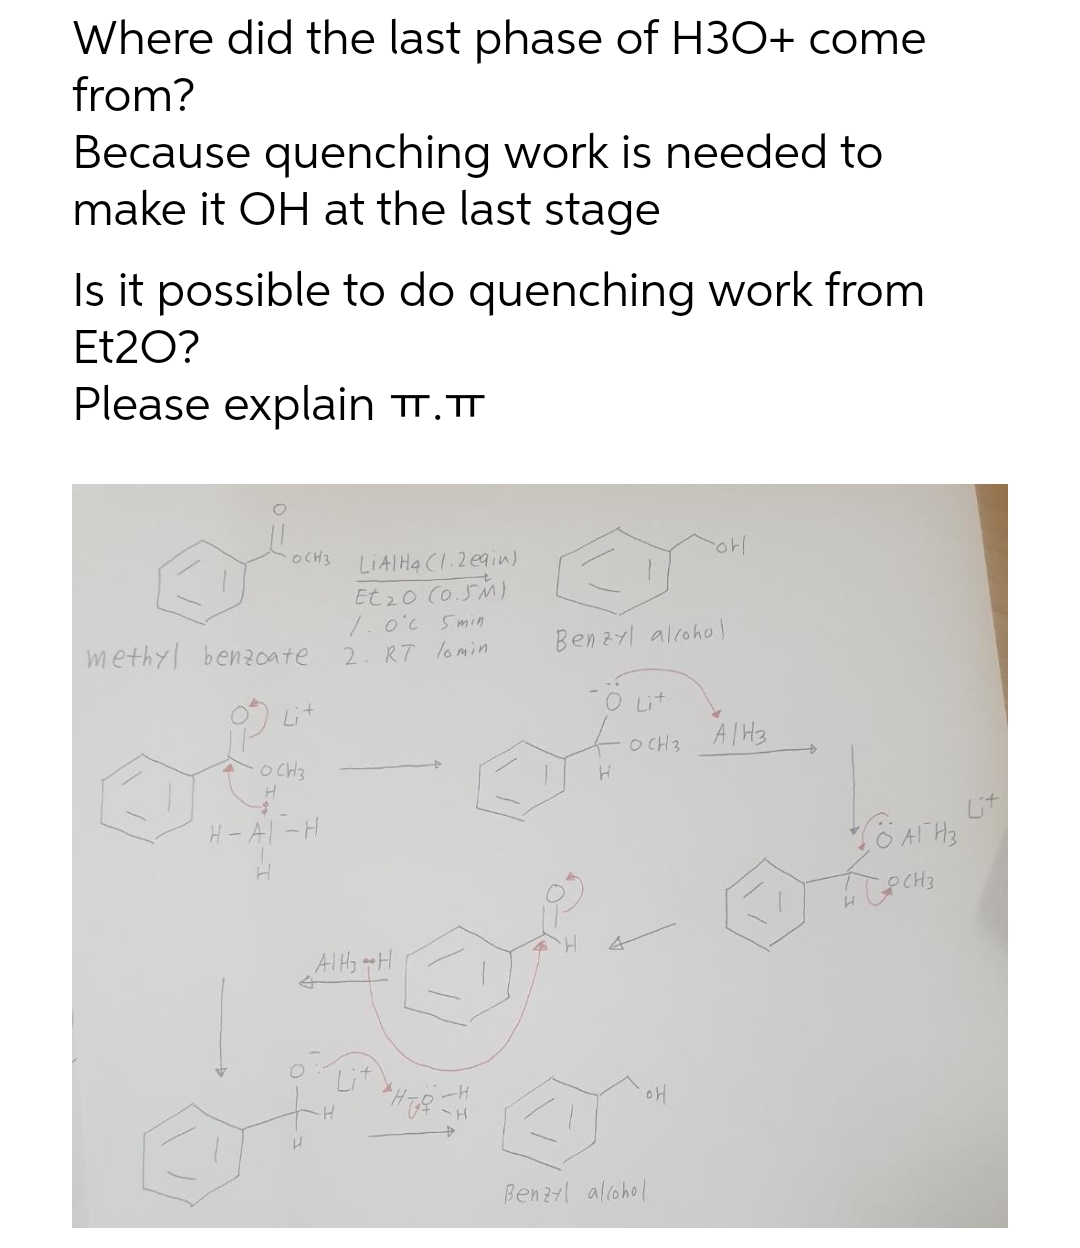 Where did the last phase of H3O+ come
from?
Because quenching work is needed to
make it OH at the last stage
Is it possible to do quenching work from
Et20?
Please explain TT.T
OCH3
LIAIHA CI.2 eain)
Et 20 (o.5M)
1. o'c Smin
2. R7 lomin
methyl benzcate
Benzyl alcohol
Lit
-O Lit
O CH3
AIH3
O CH3
H- Al -H
Lit
AIH gH
Lit
Benzl alcohol
